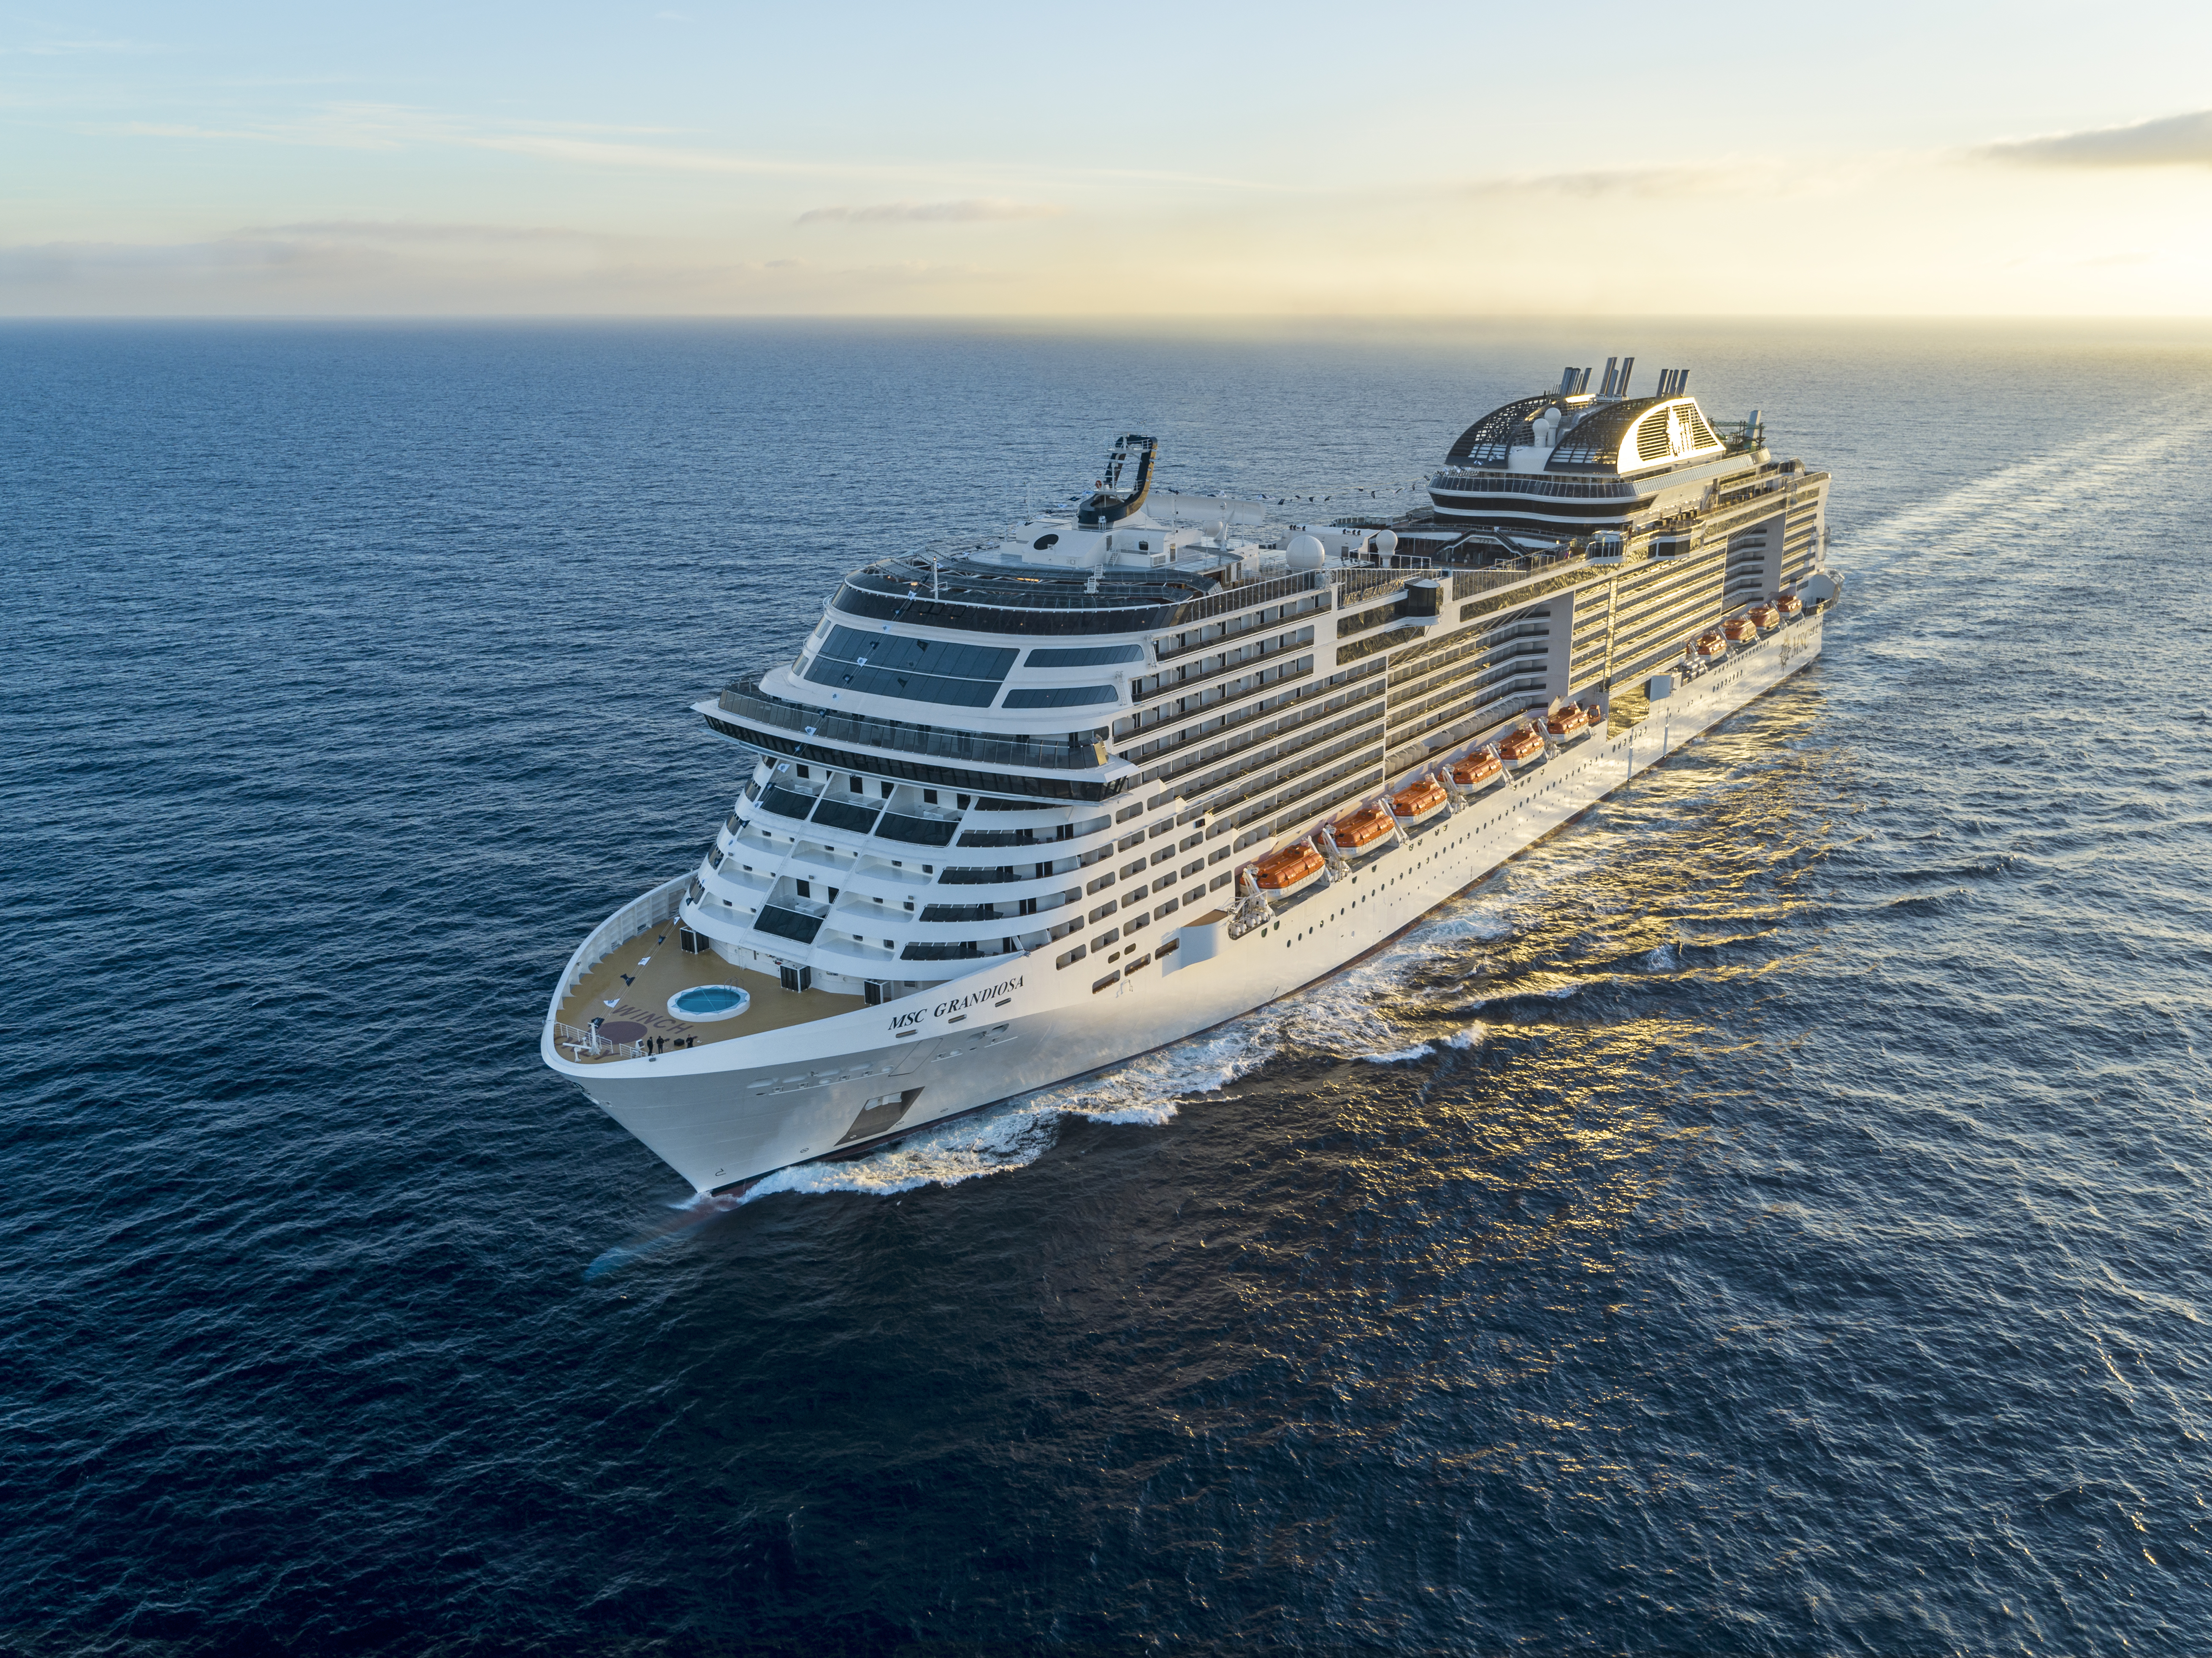 MSC Cruises: a GE project partner, evaluating cleaner maritime technologies for its fleet